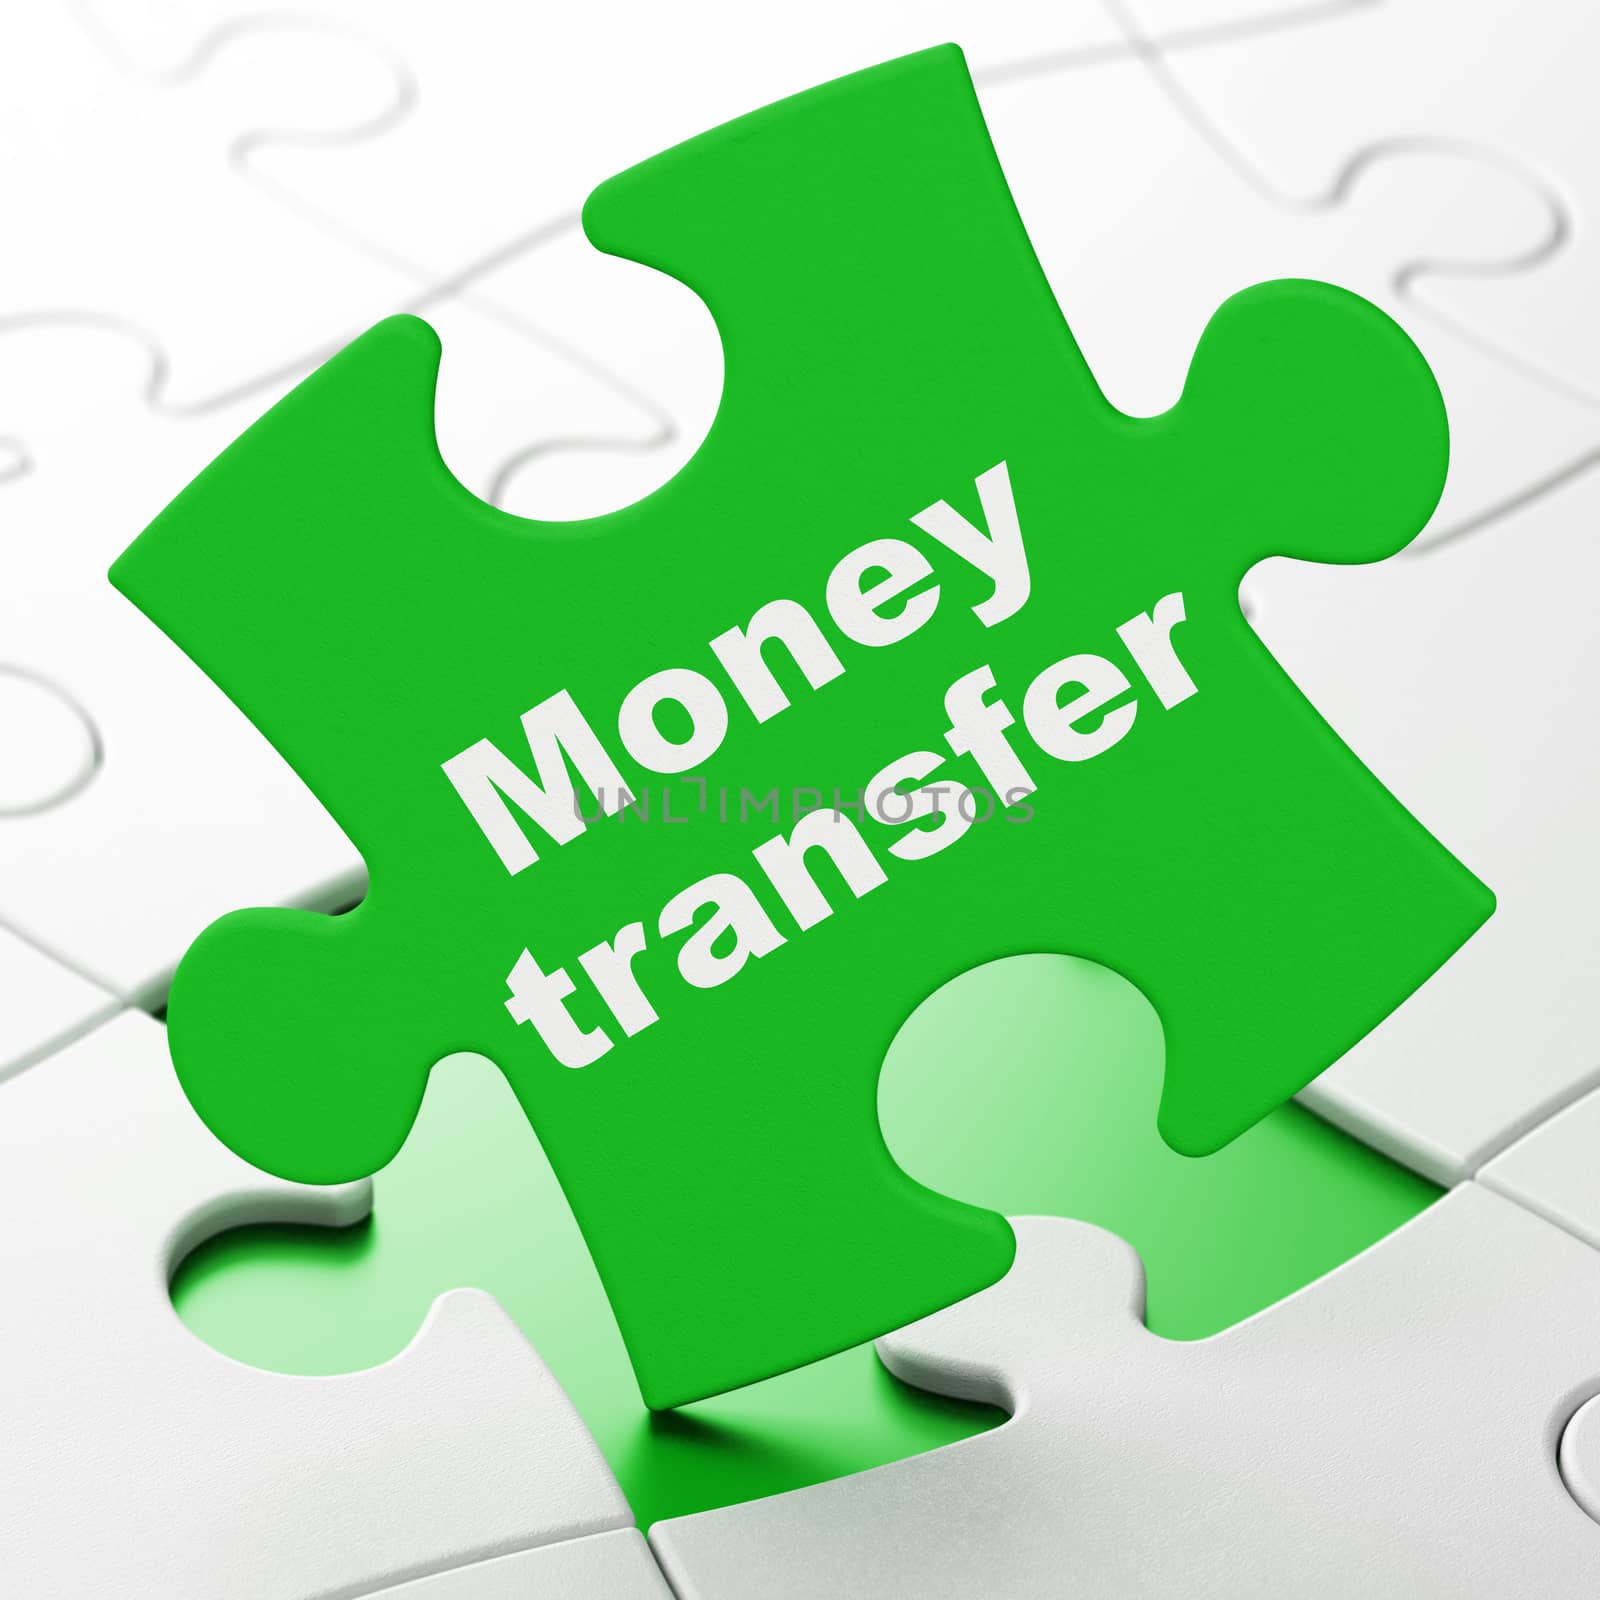 Business concept: Money Transfer on Green puzzle pieces background, 3d render